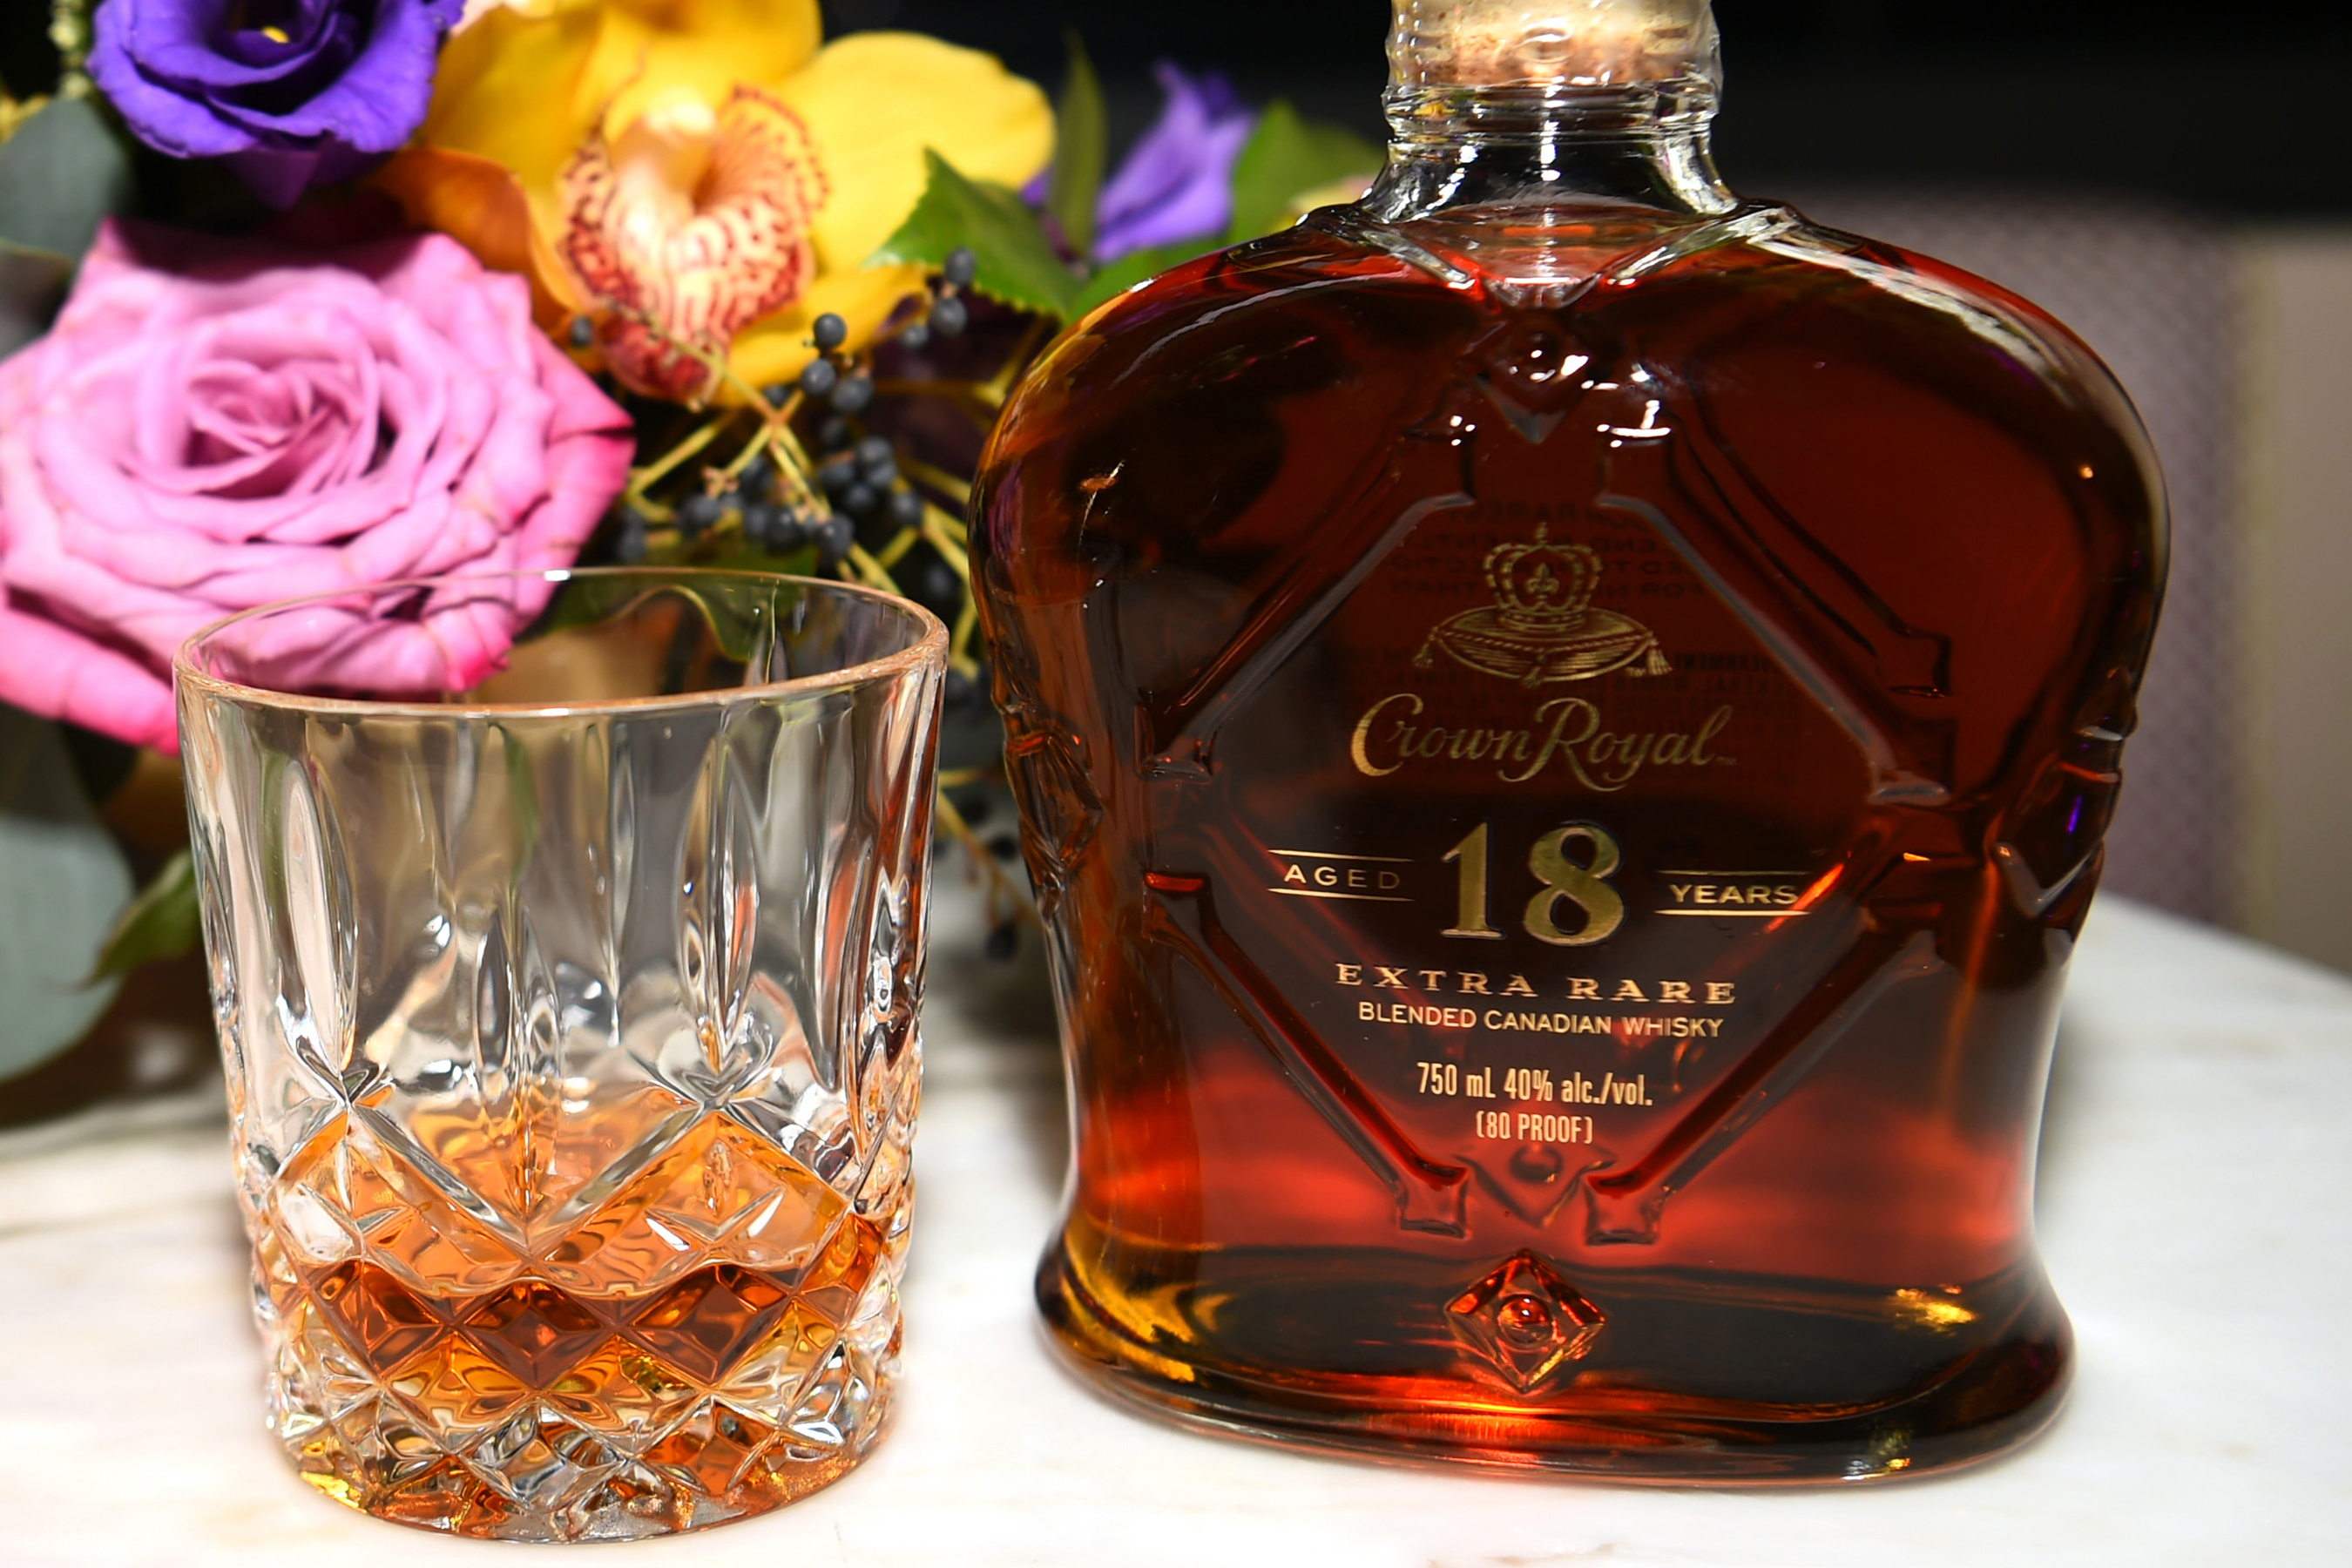 Crown Royal Aged 18 Years honors the time it takes to reveal the extra rare expression of a unique blend of whiskies.